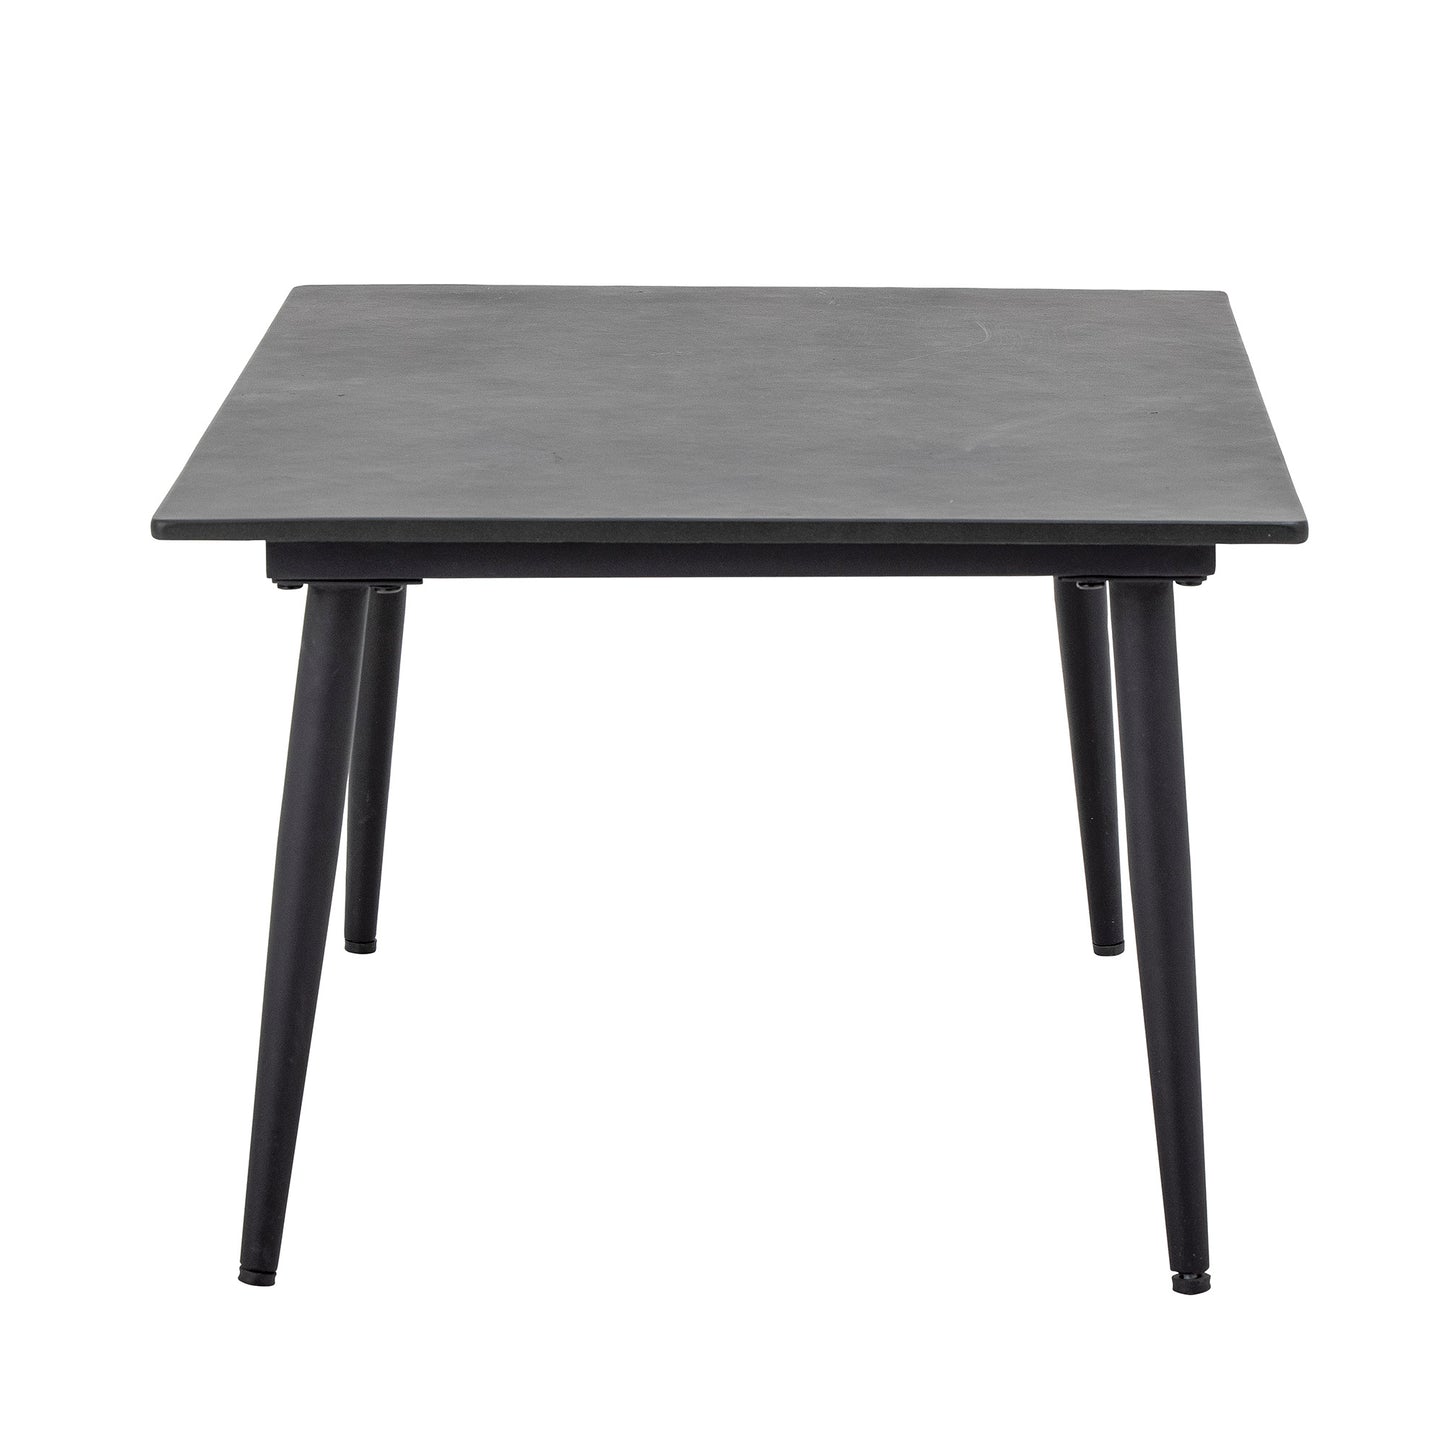 Bloomingville Outdoor Pavone Cement Coffee Table in Black